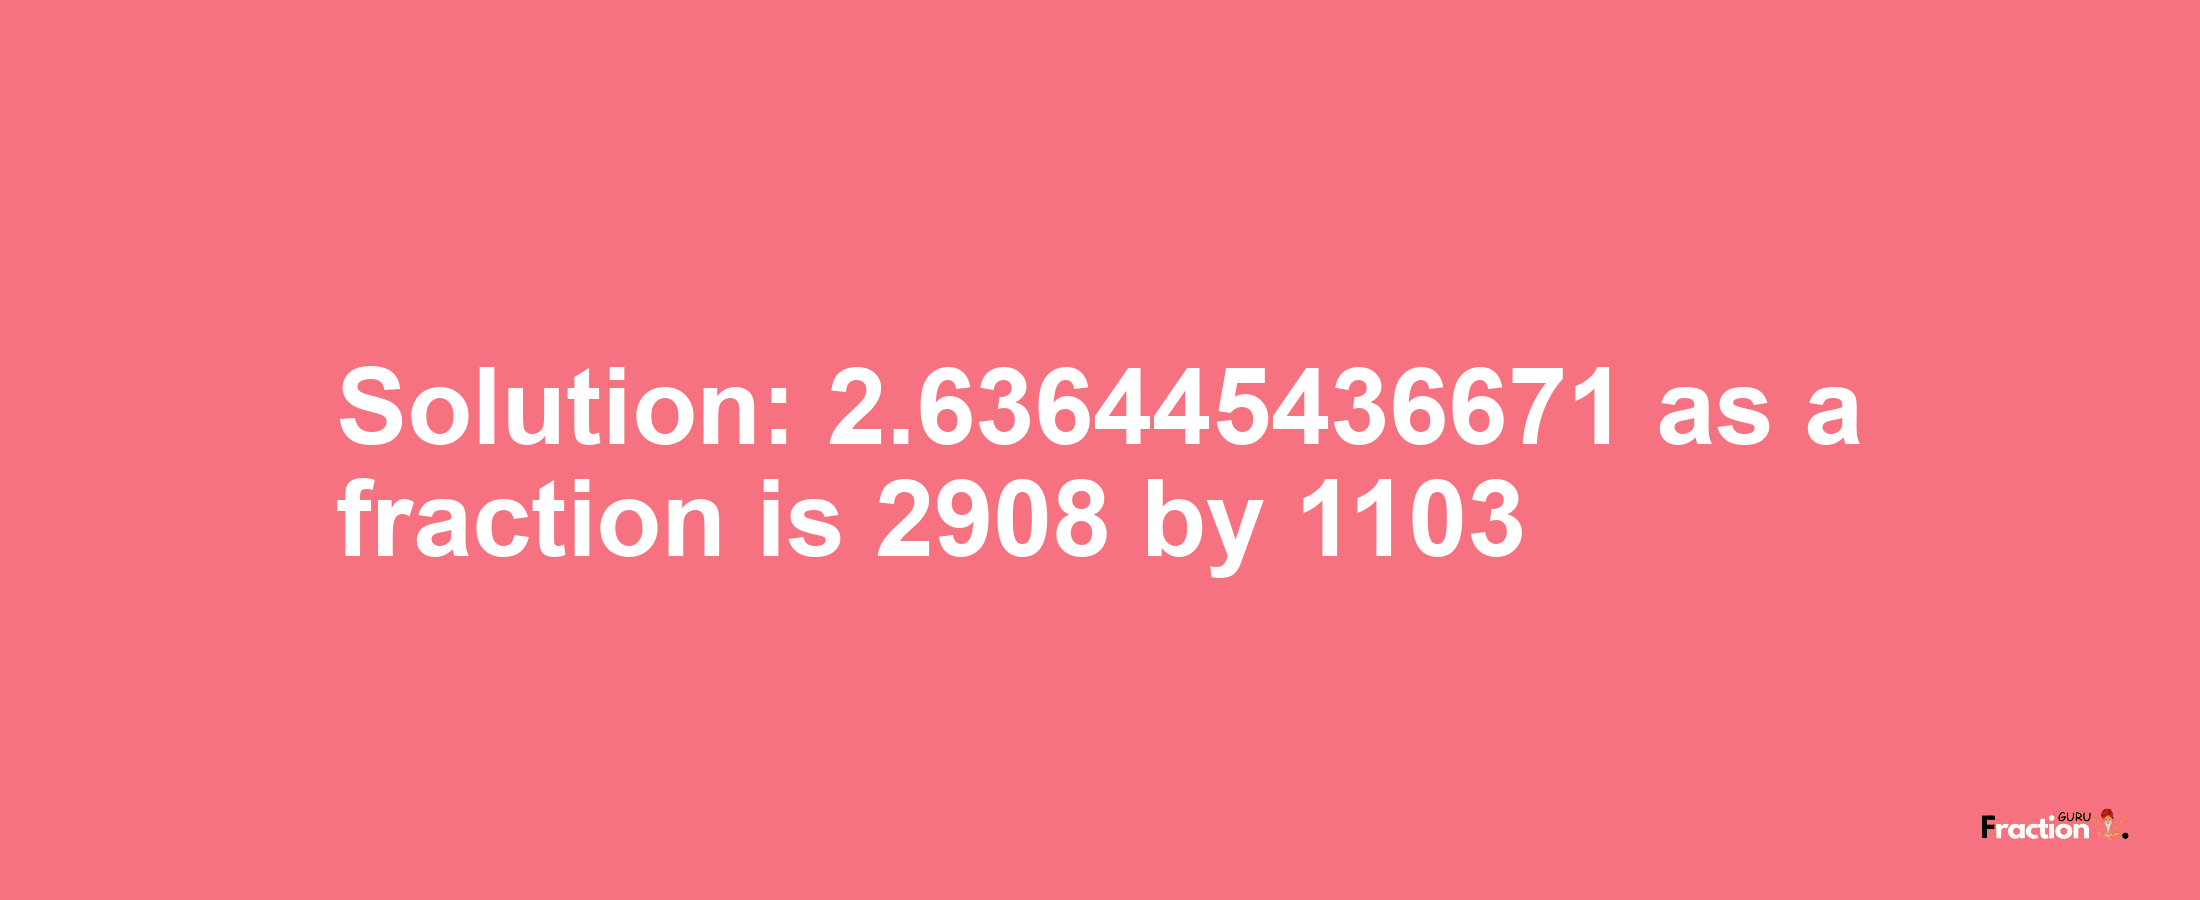 Solution:2.636445436671 as a fraction is 2908/1103